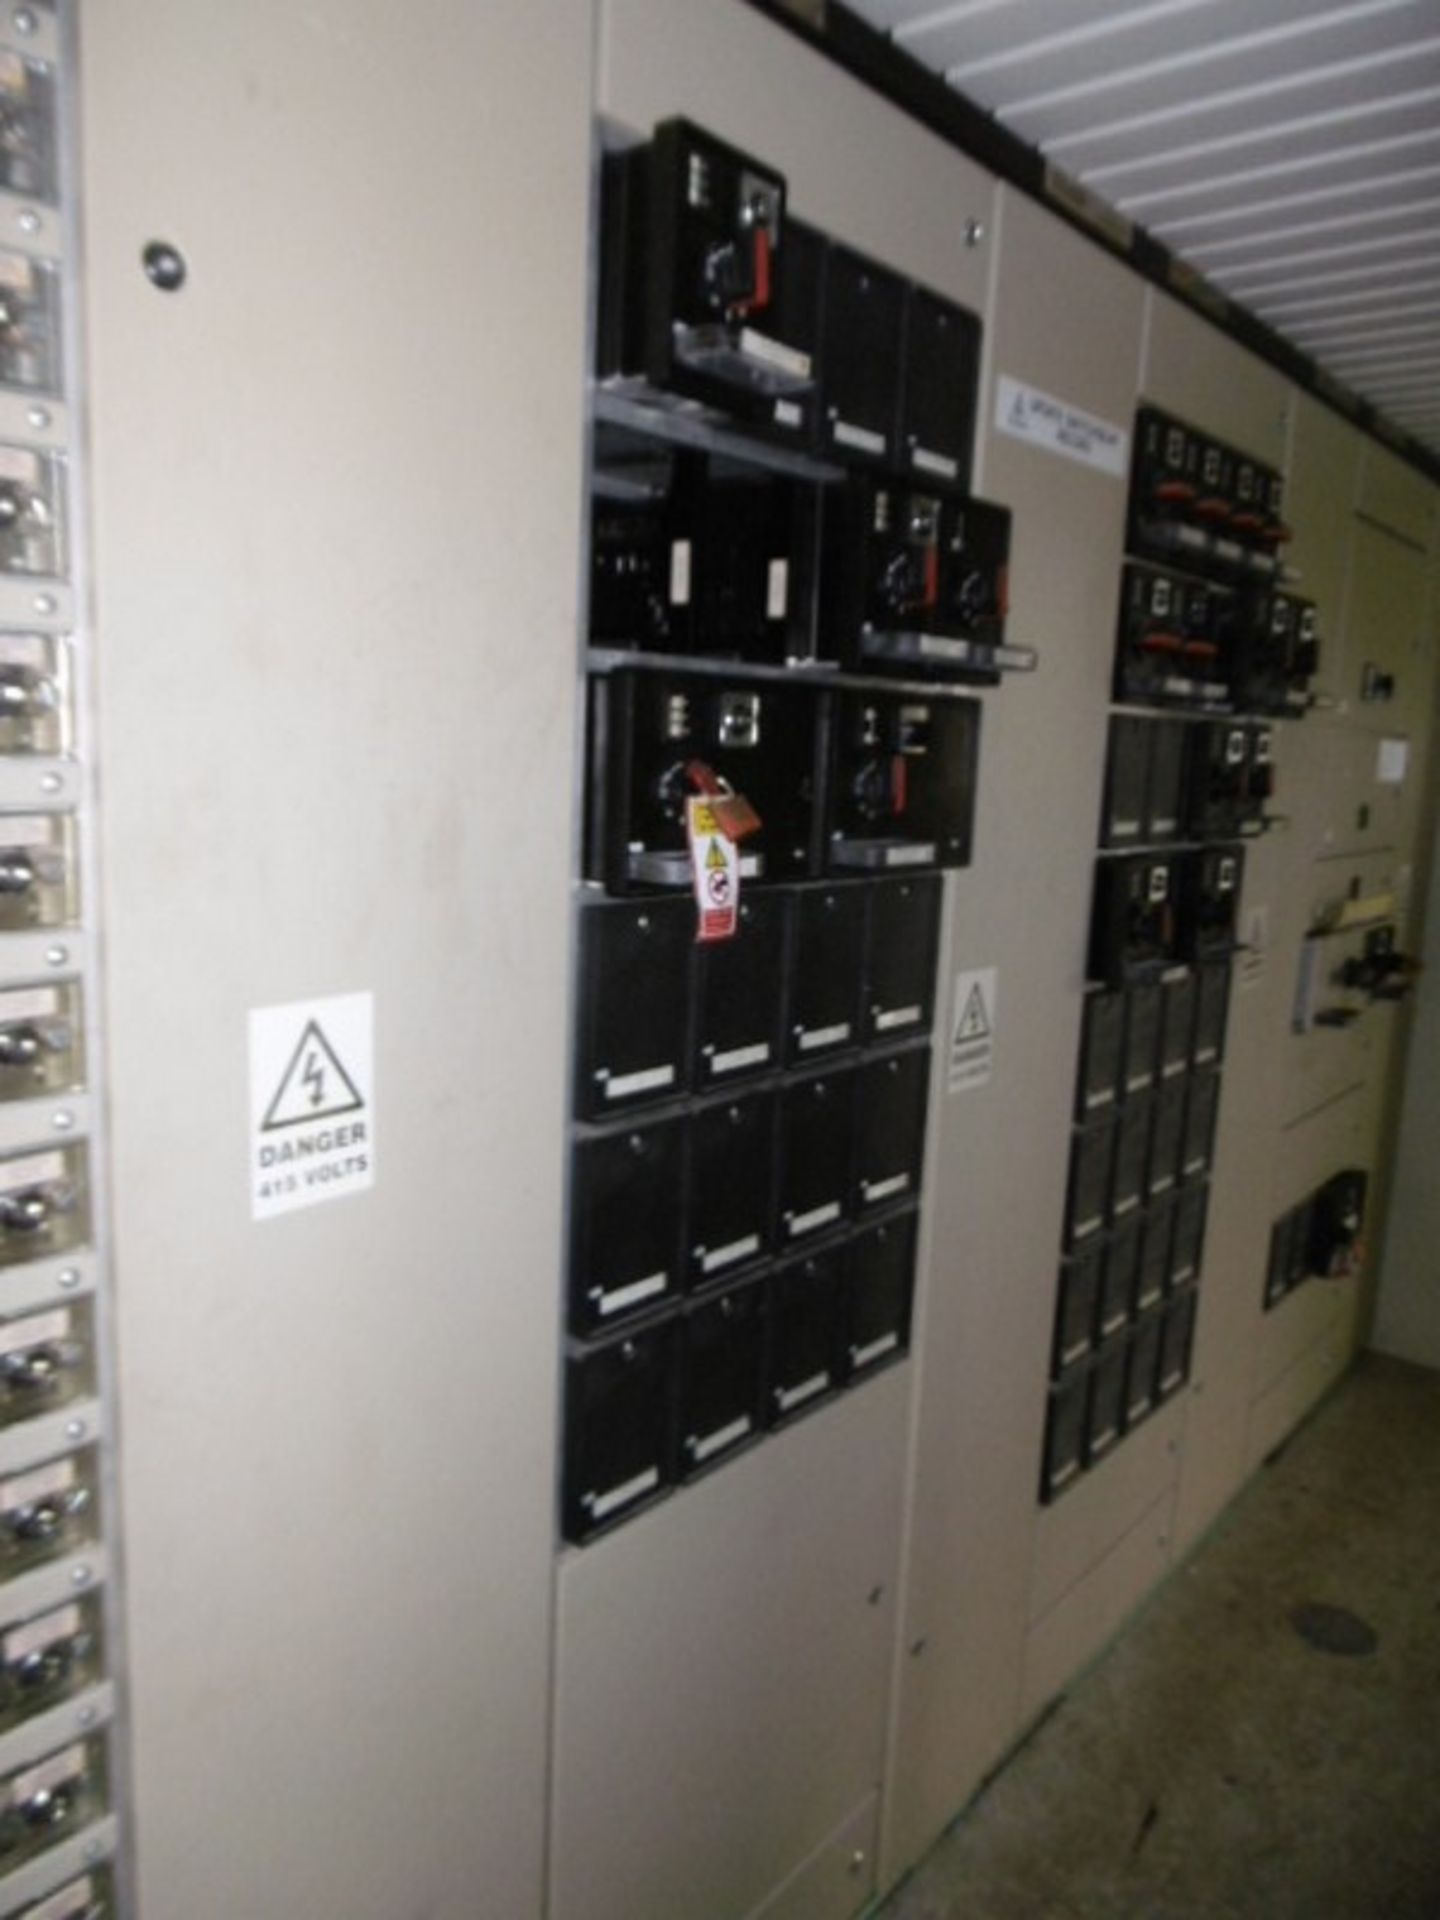 Large Qty Switchgear - From Gas Turbine 2 Control Module Building - Image 25 of 36